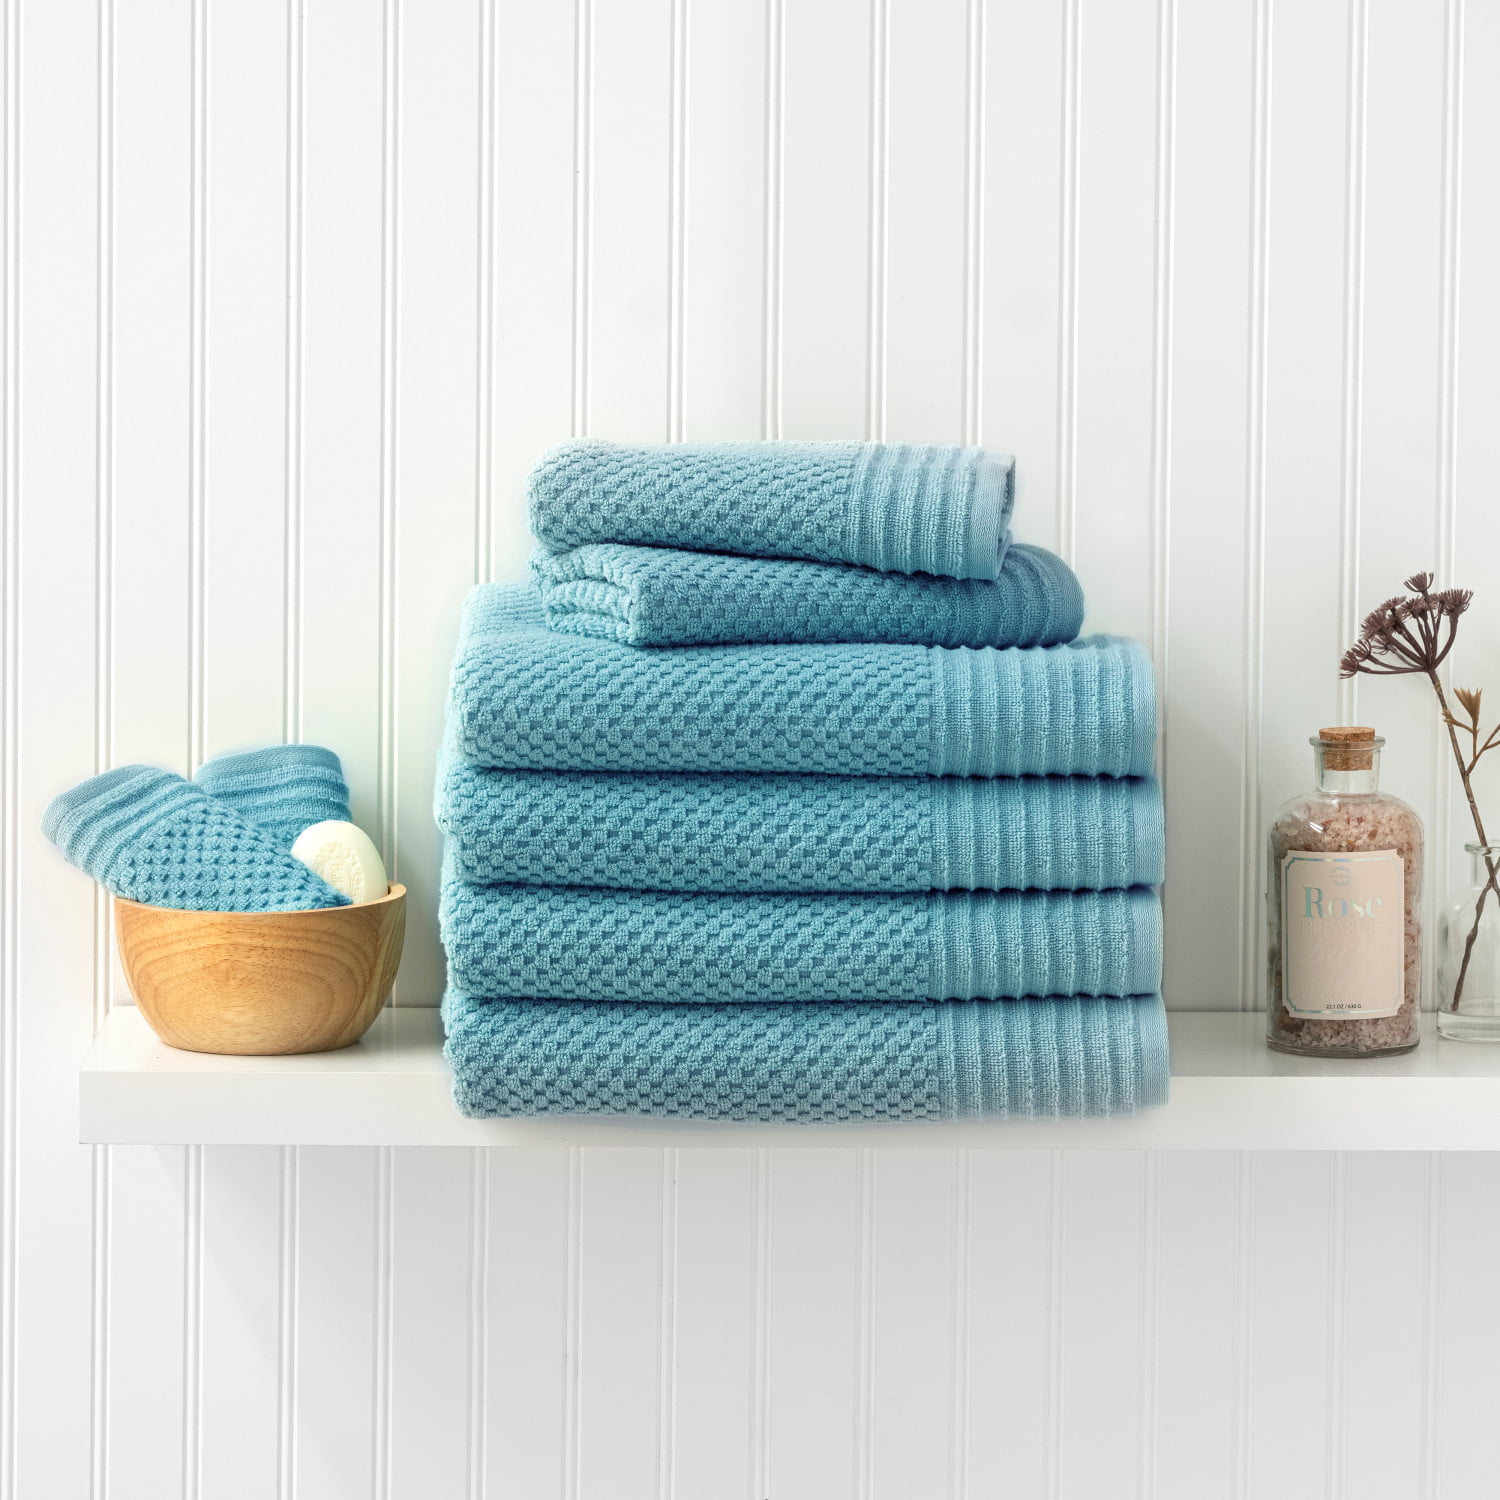 New Martha Stewart sculpted towel set with 2 bath towels, 2 hand towels & 2  wash cloths in a beautiful Dusty Aqua color. Entire set for one money. -  Rocky Mountain Estate Brokers Inc.